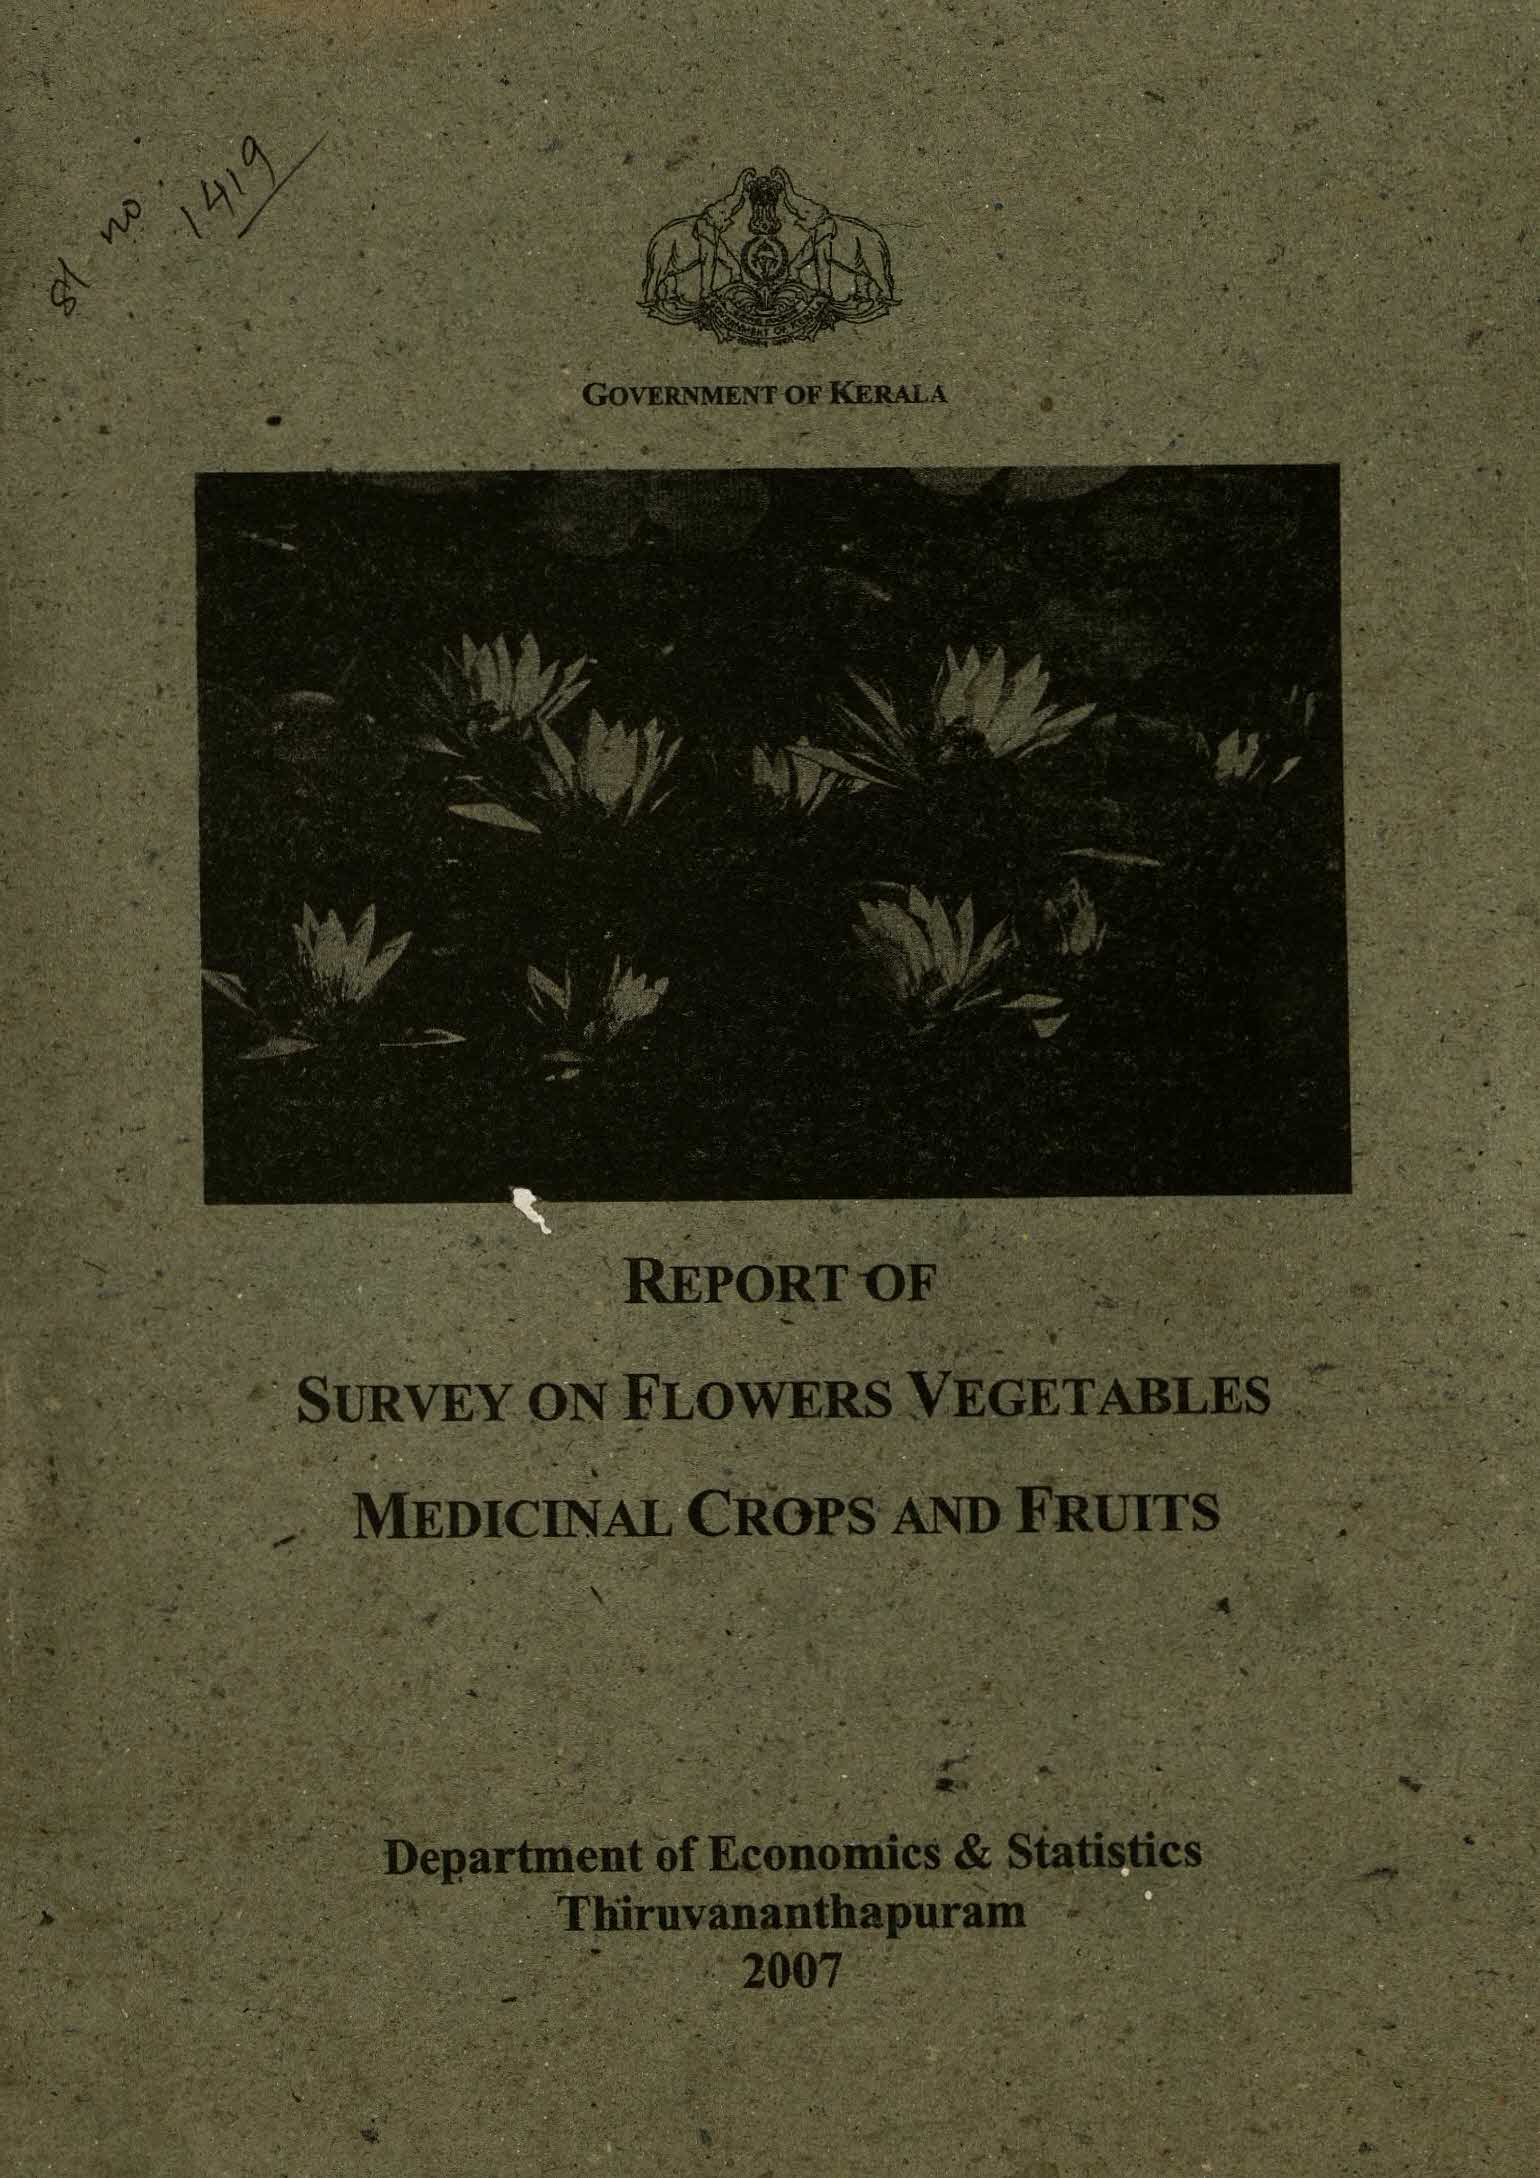 Survey on Flowers and Vegitables Medicinal crops and Fruits 2007